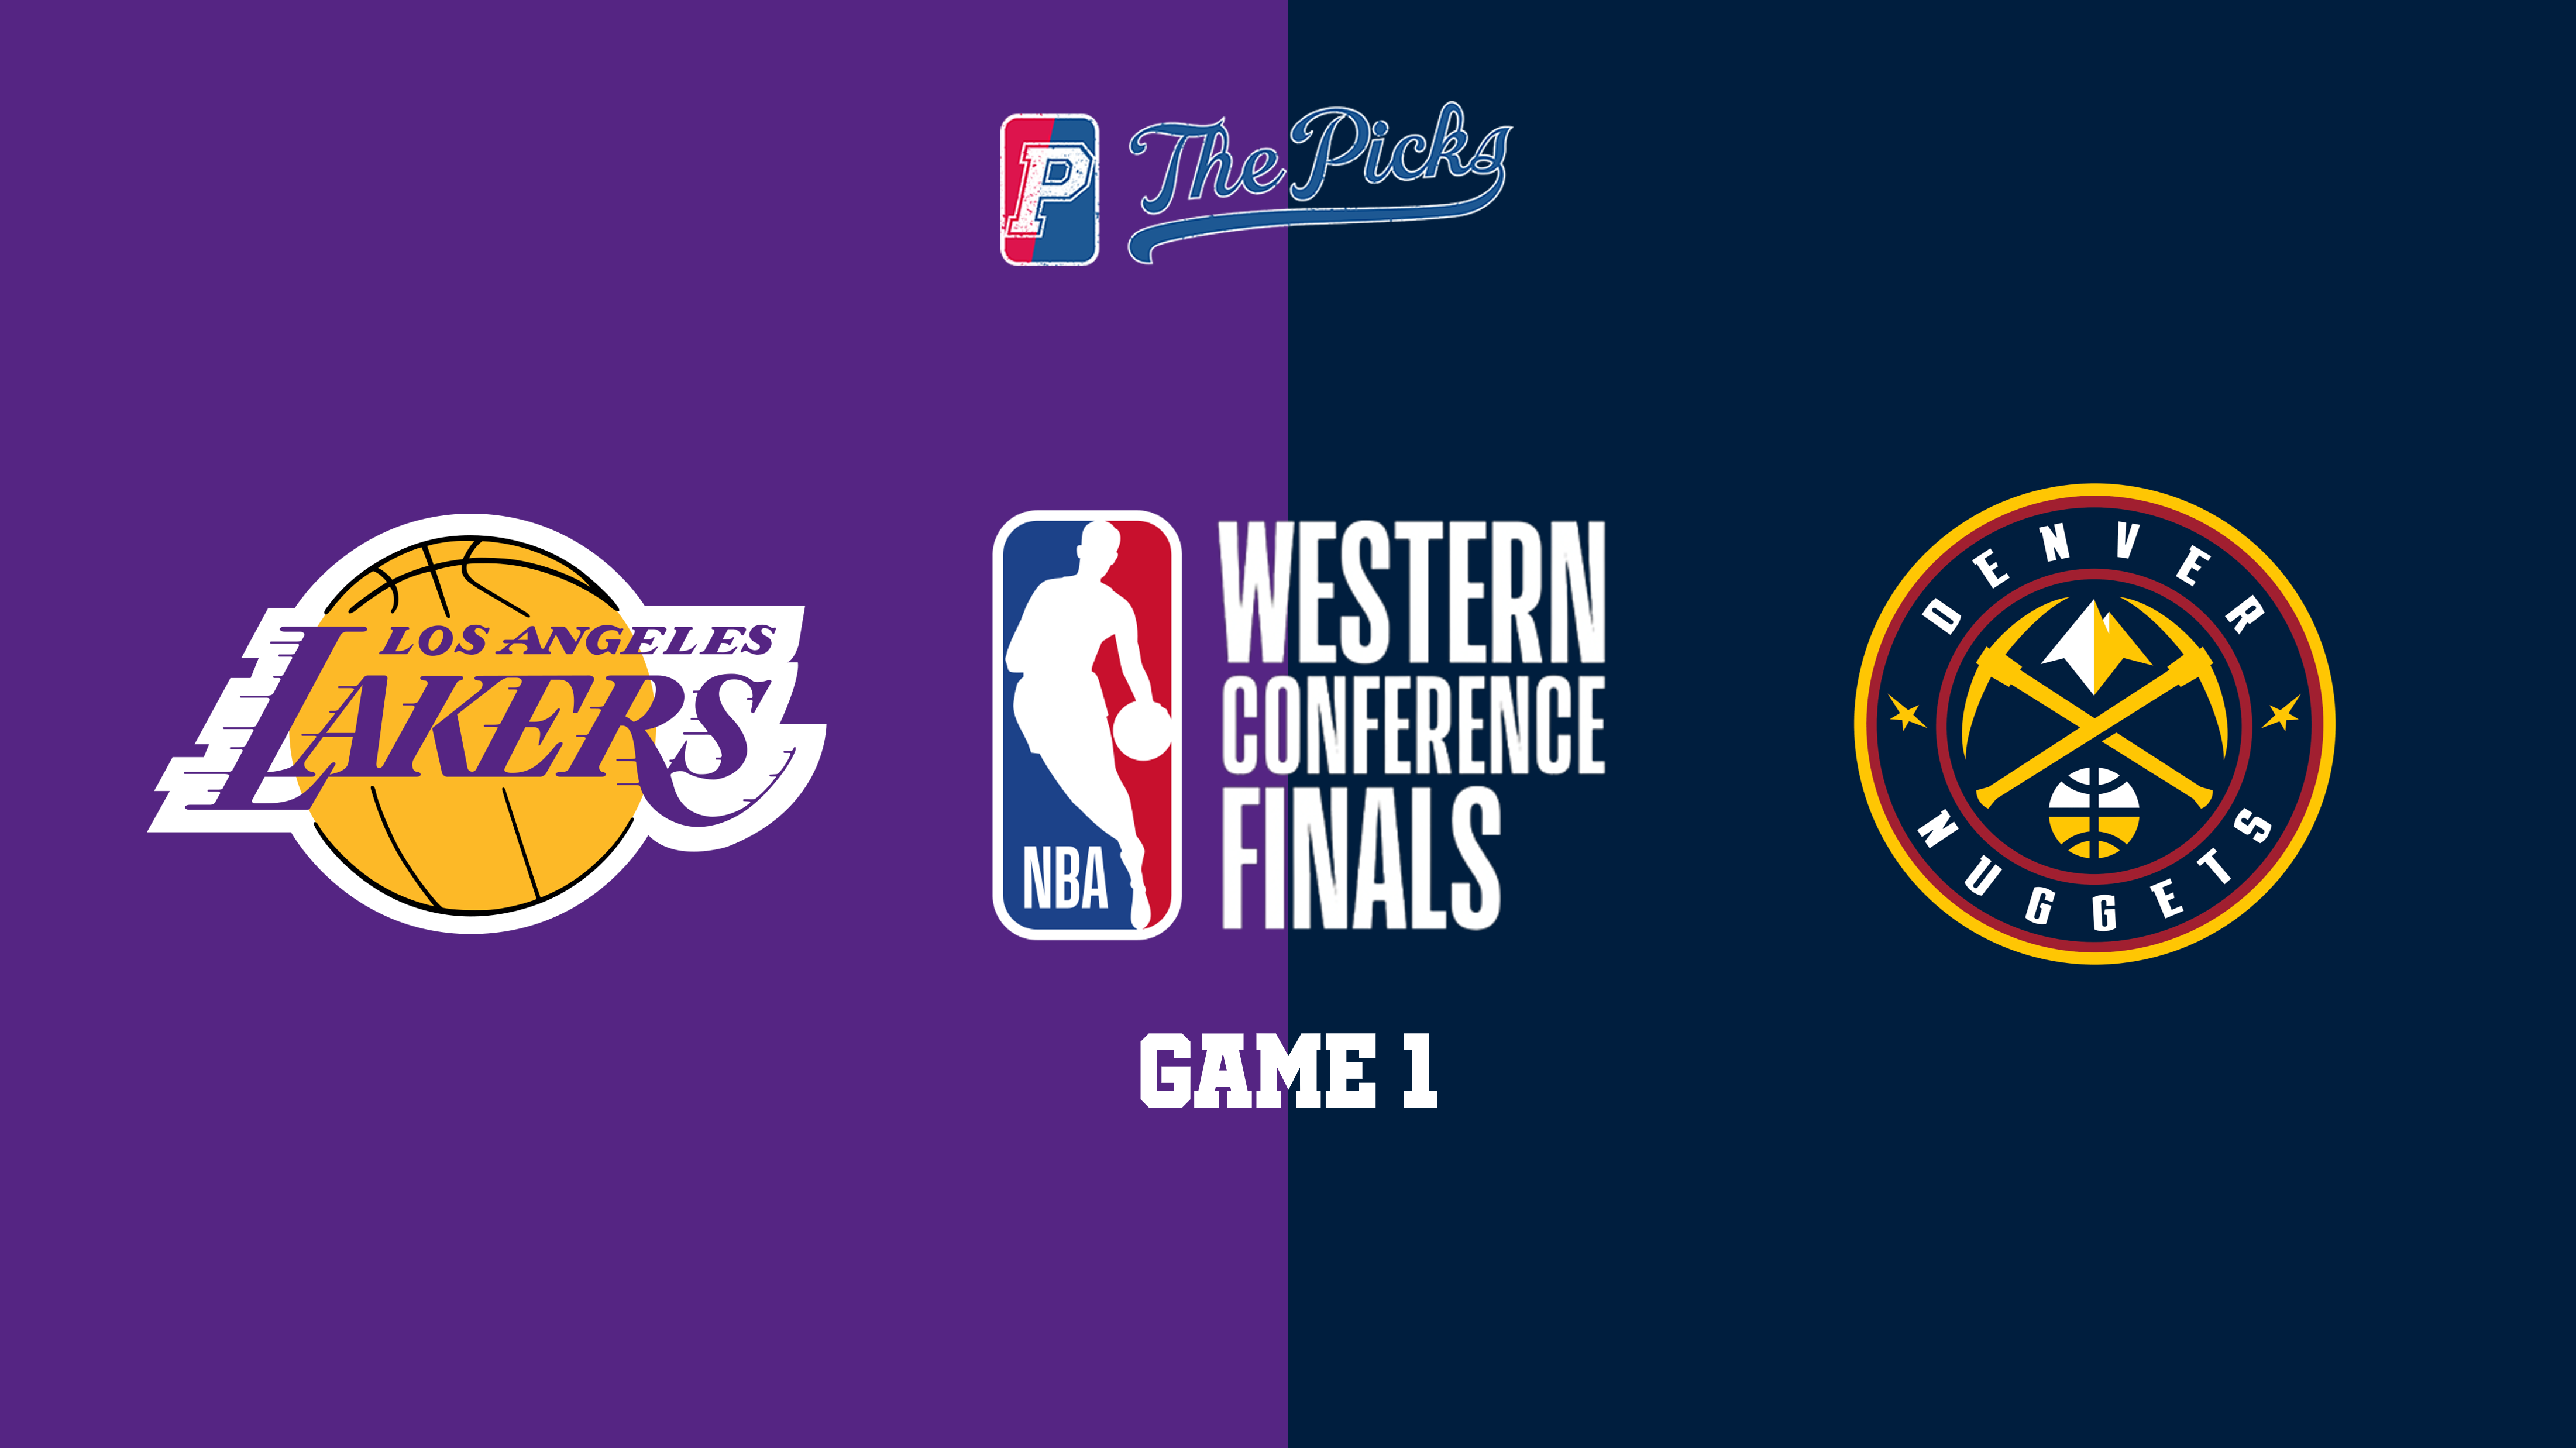 Conference Finals starting tonight